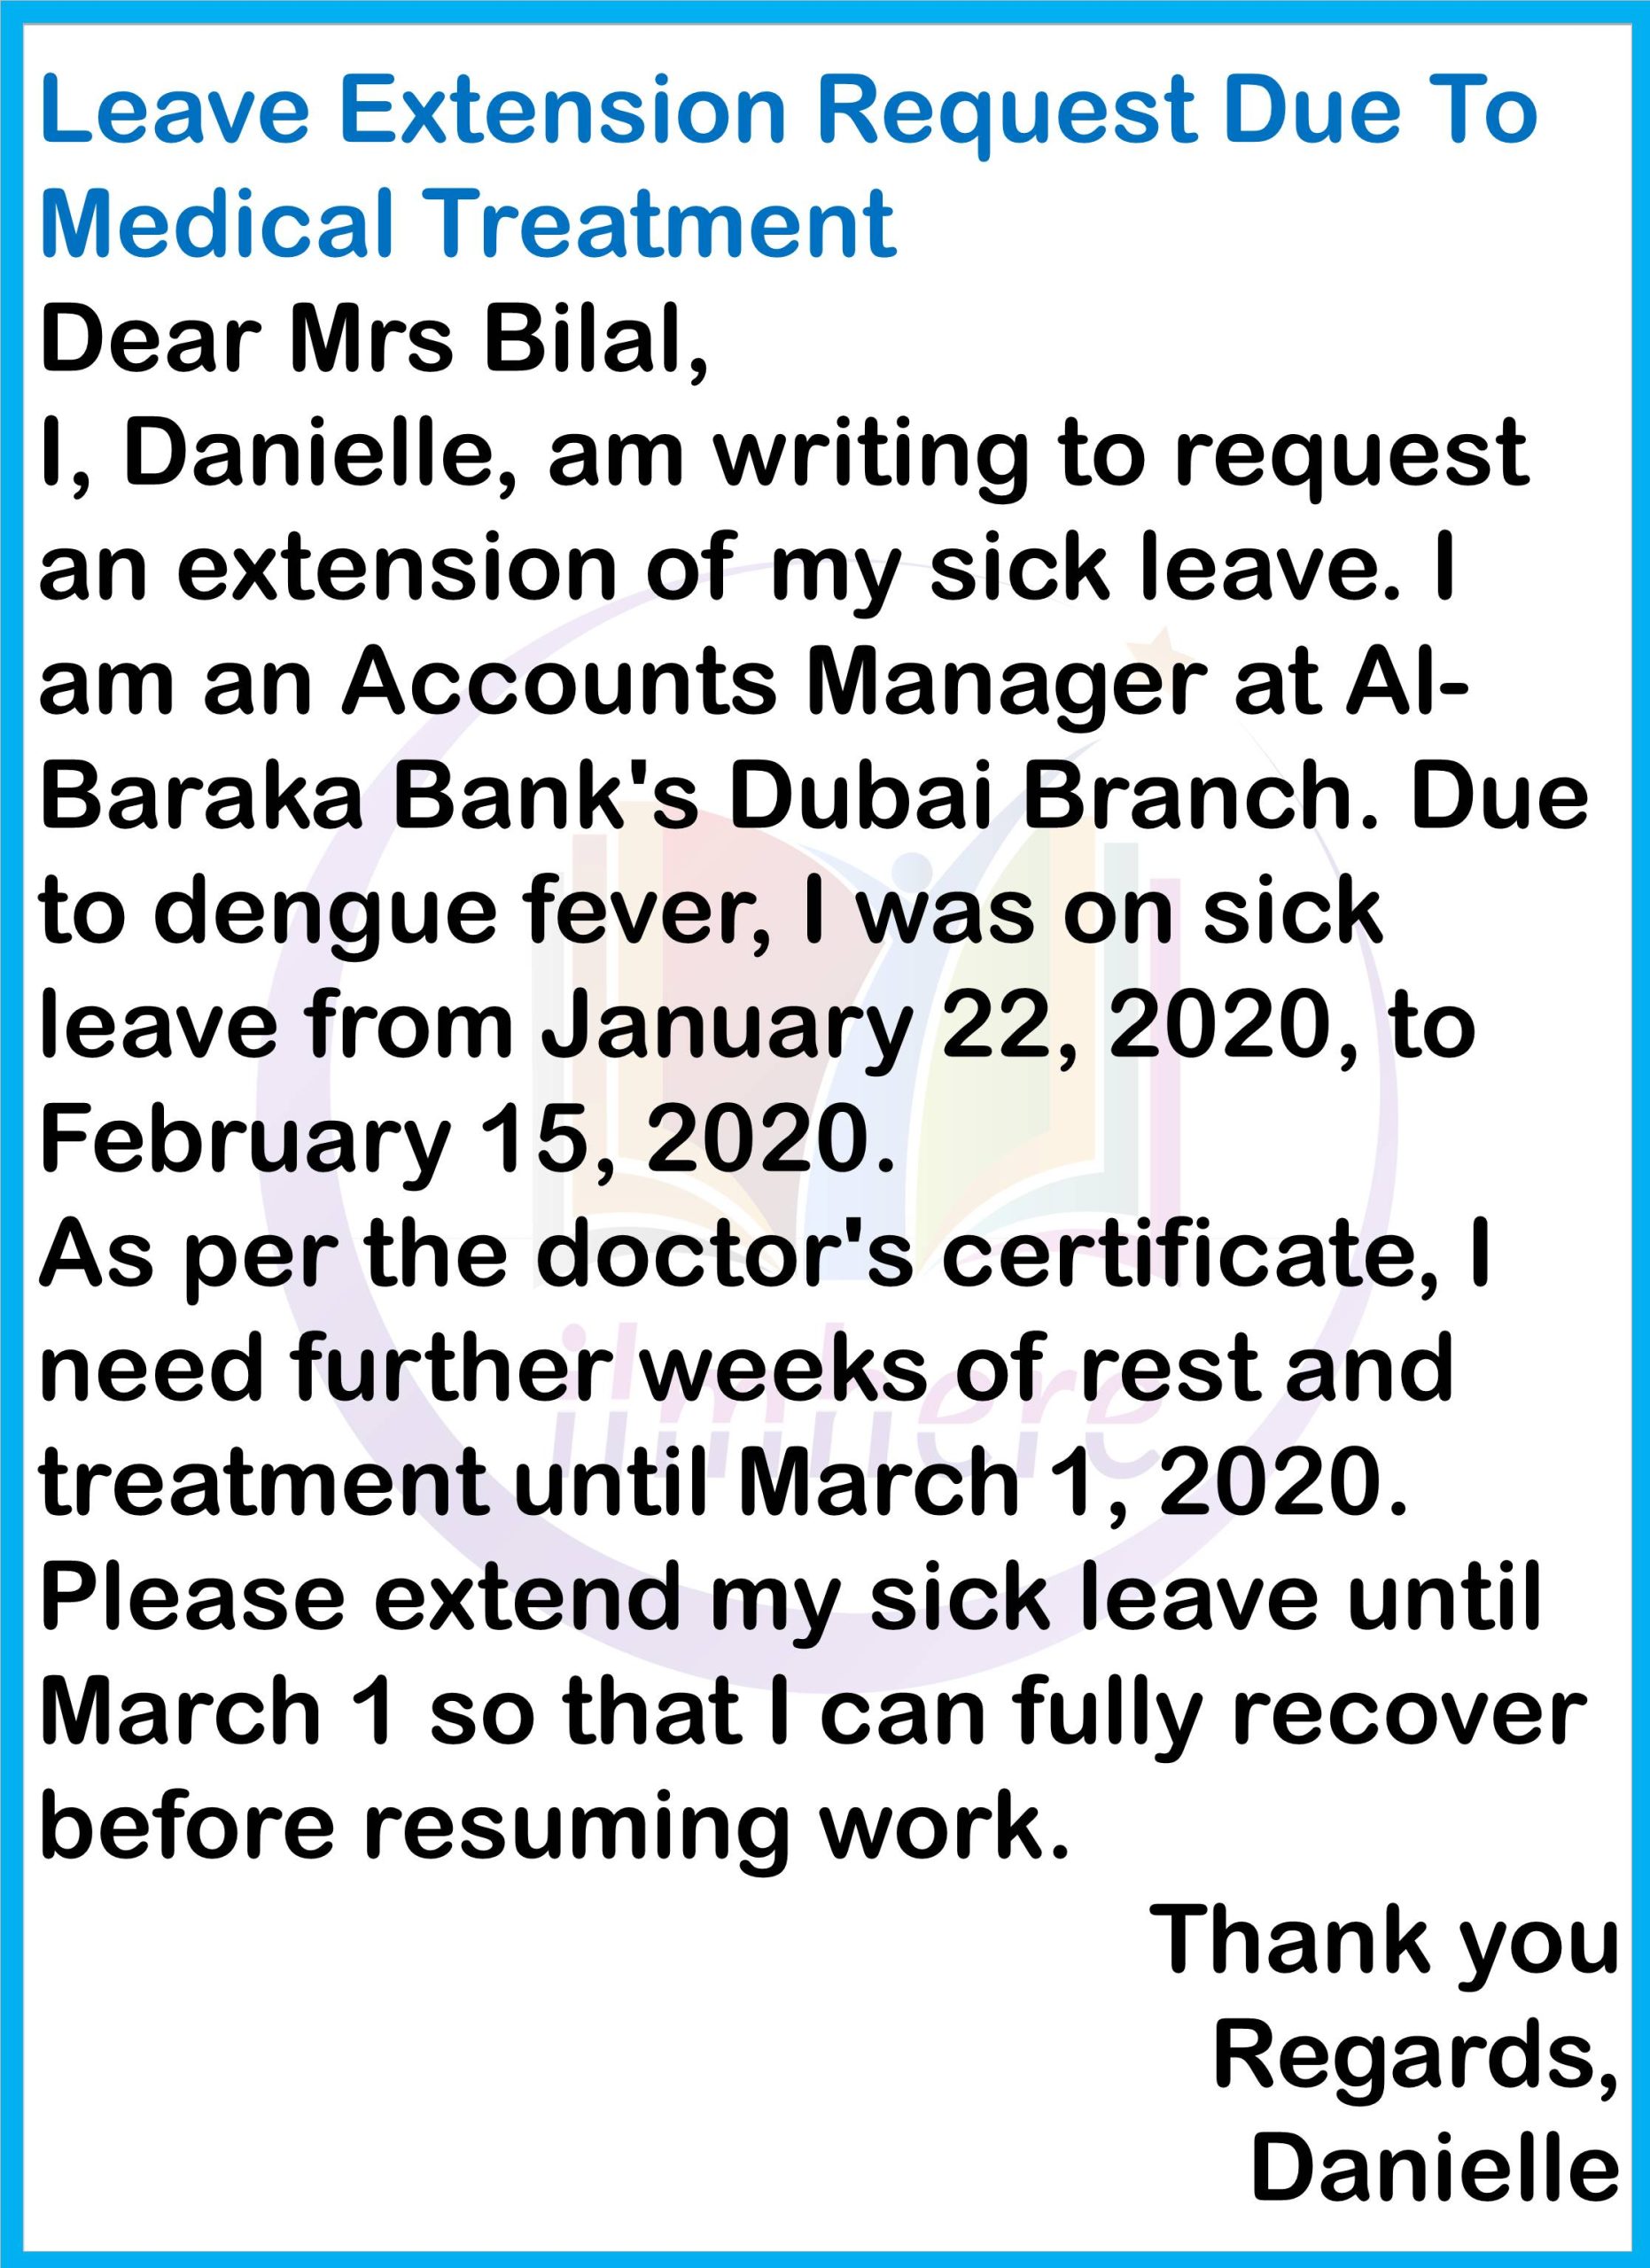 Leave Extension Request Due To Medical Treatment